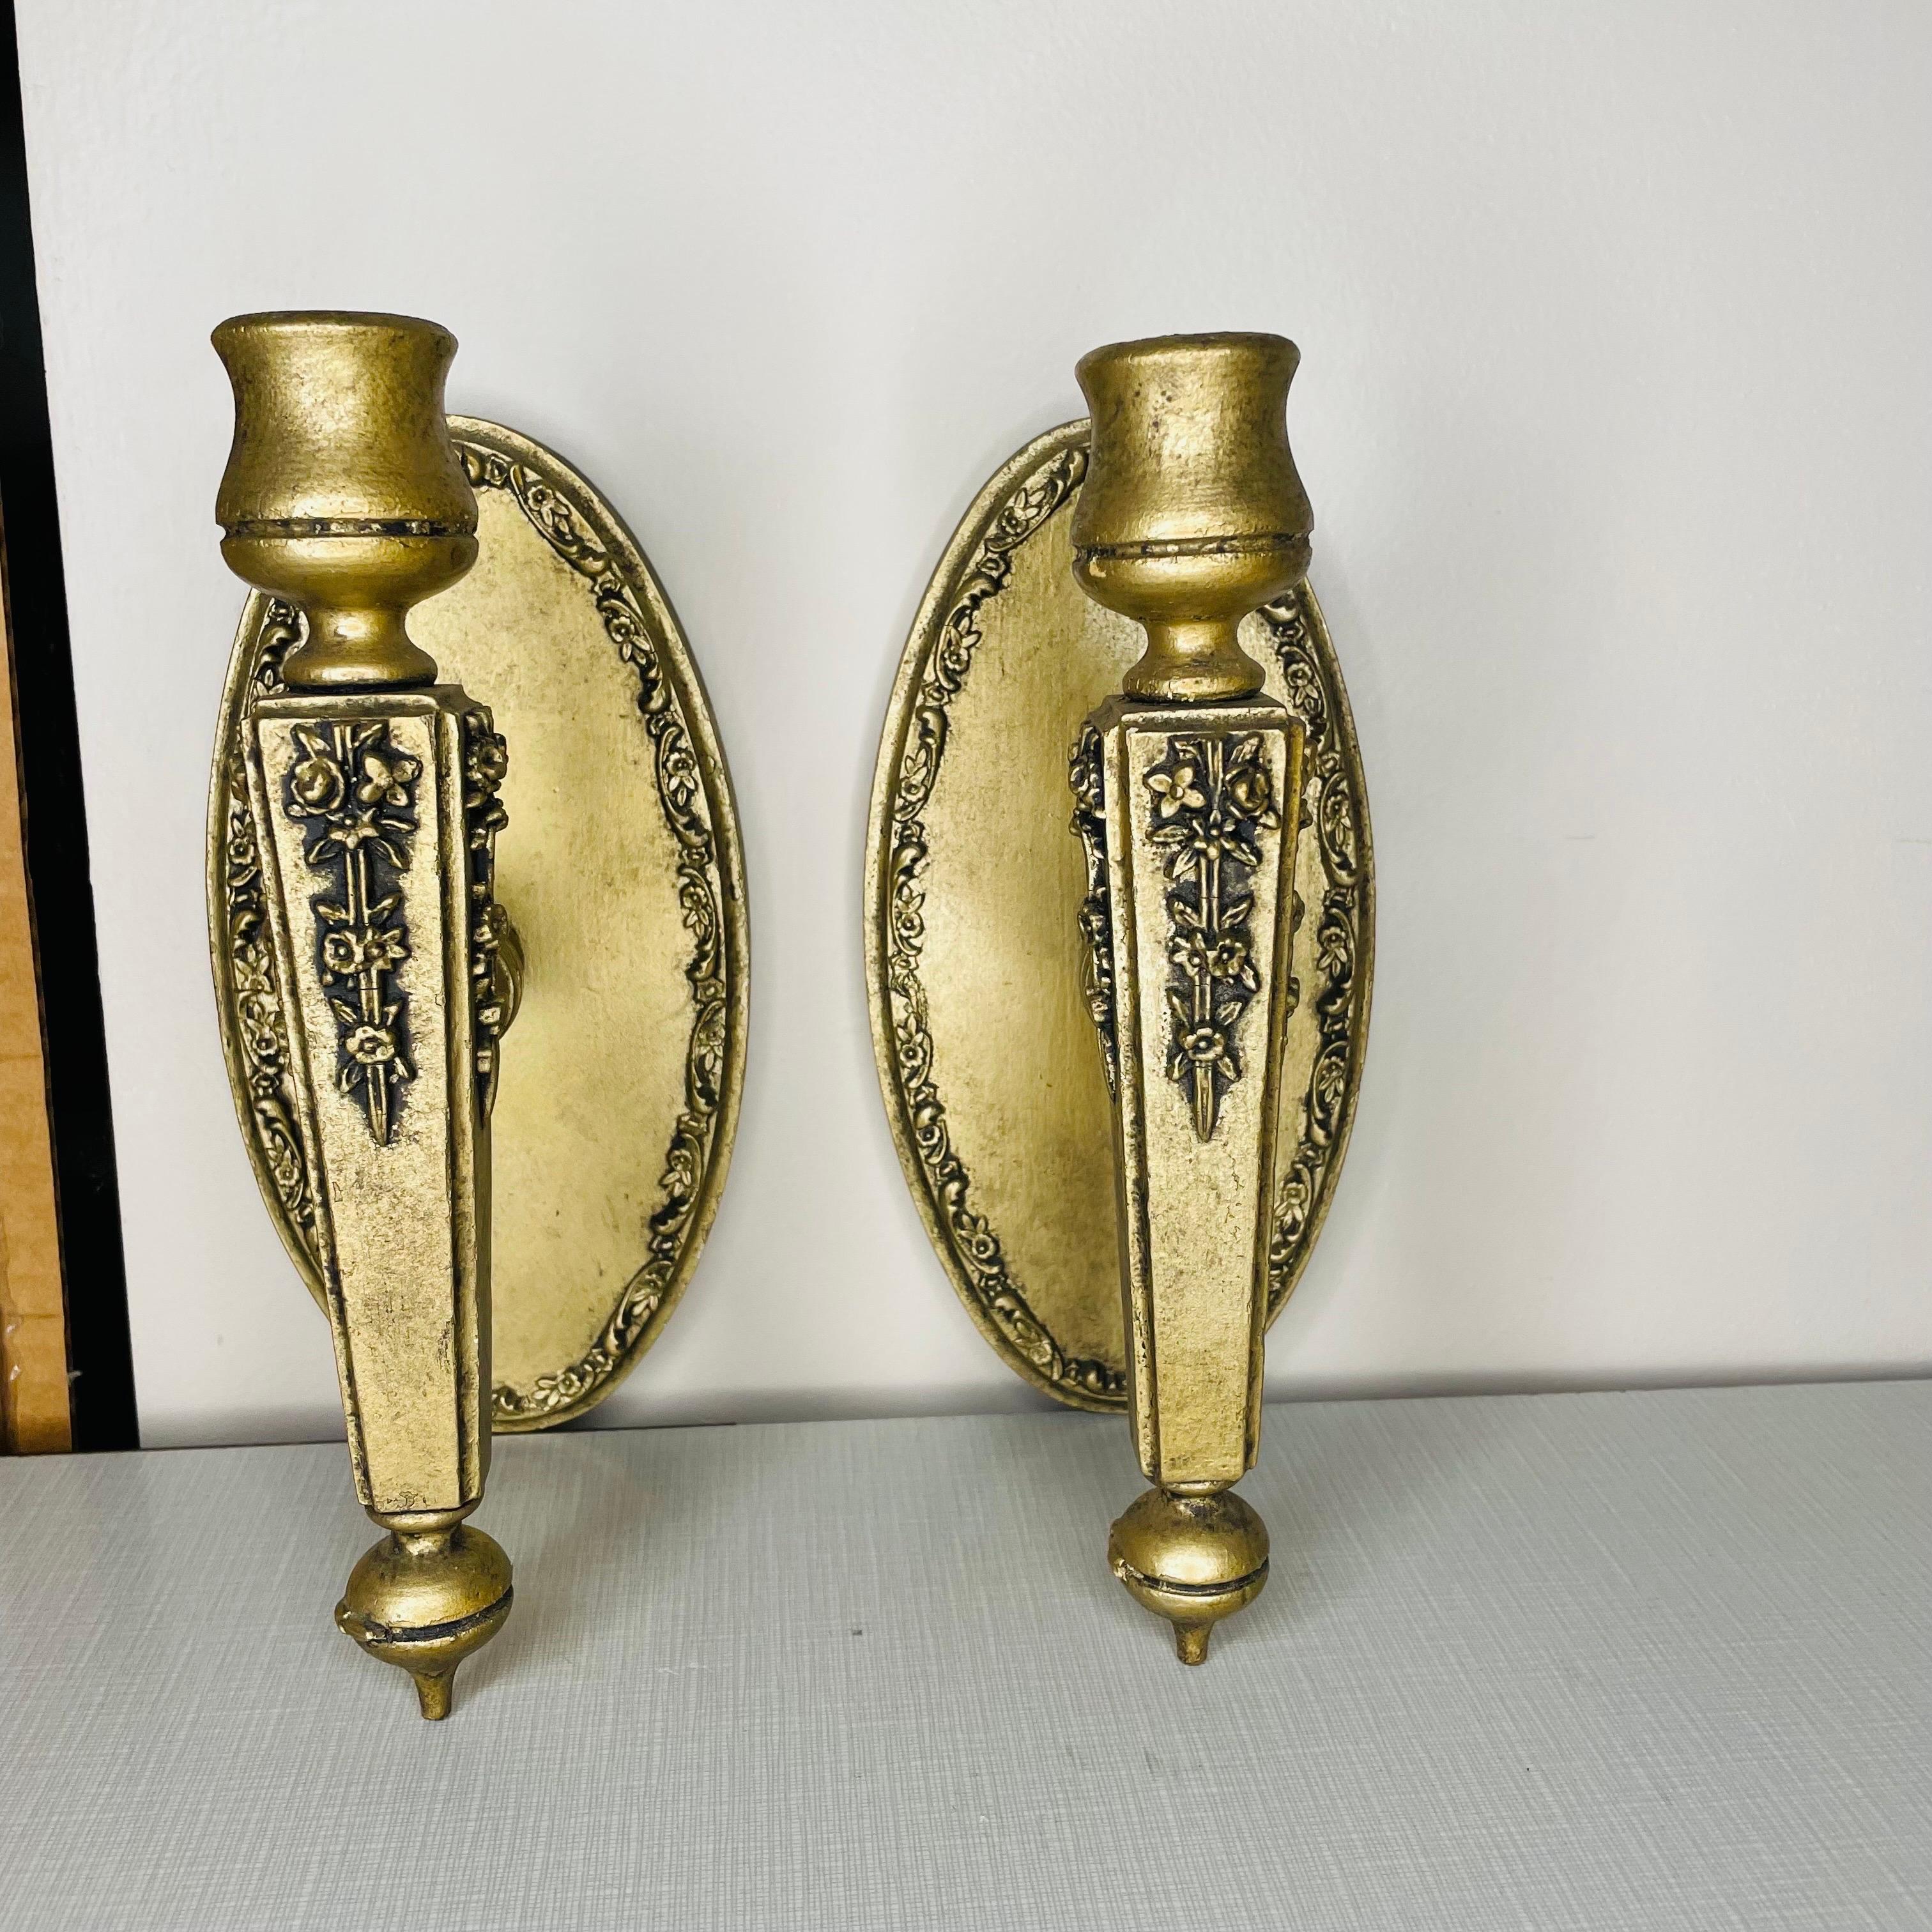 French Provincial Vintage Gold Giltwood Single-Arm Candle Sconces, a Pair For Sale